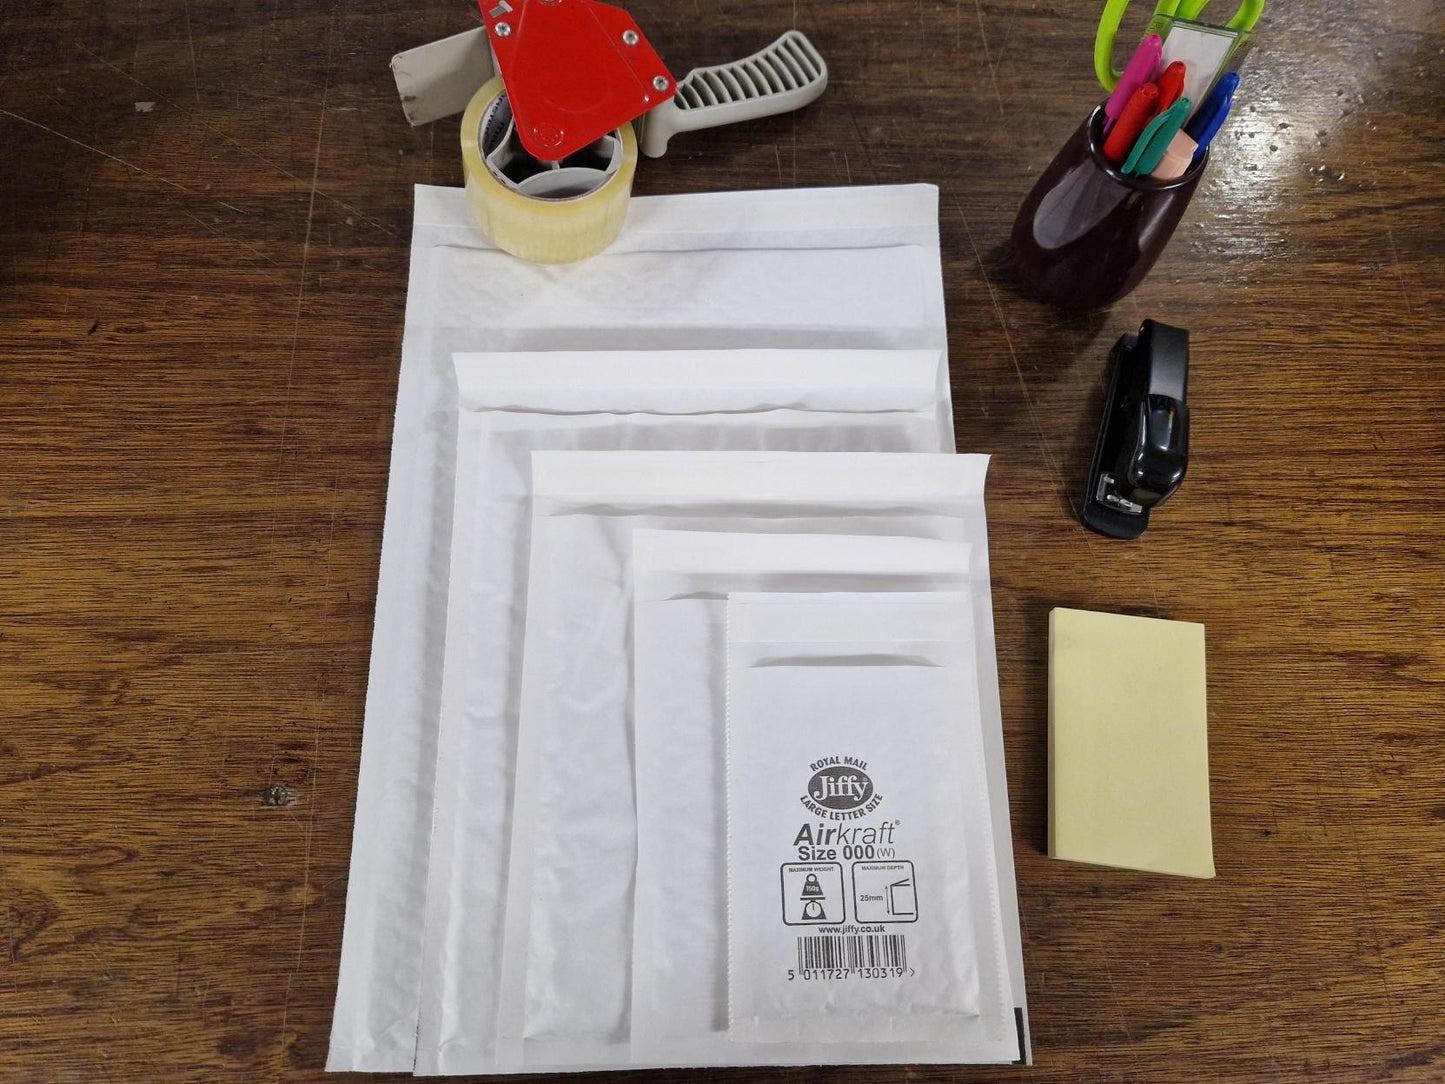 Assorted sizes of Jiffy envelopes: JL000, JL00, JL2, JL4 & JL6. Each size comes in a pack of 10, all in white colour.